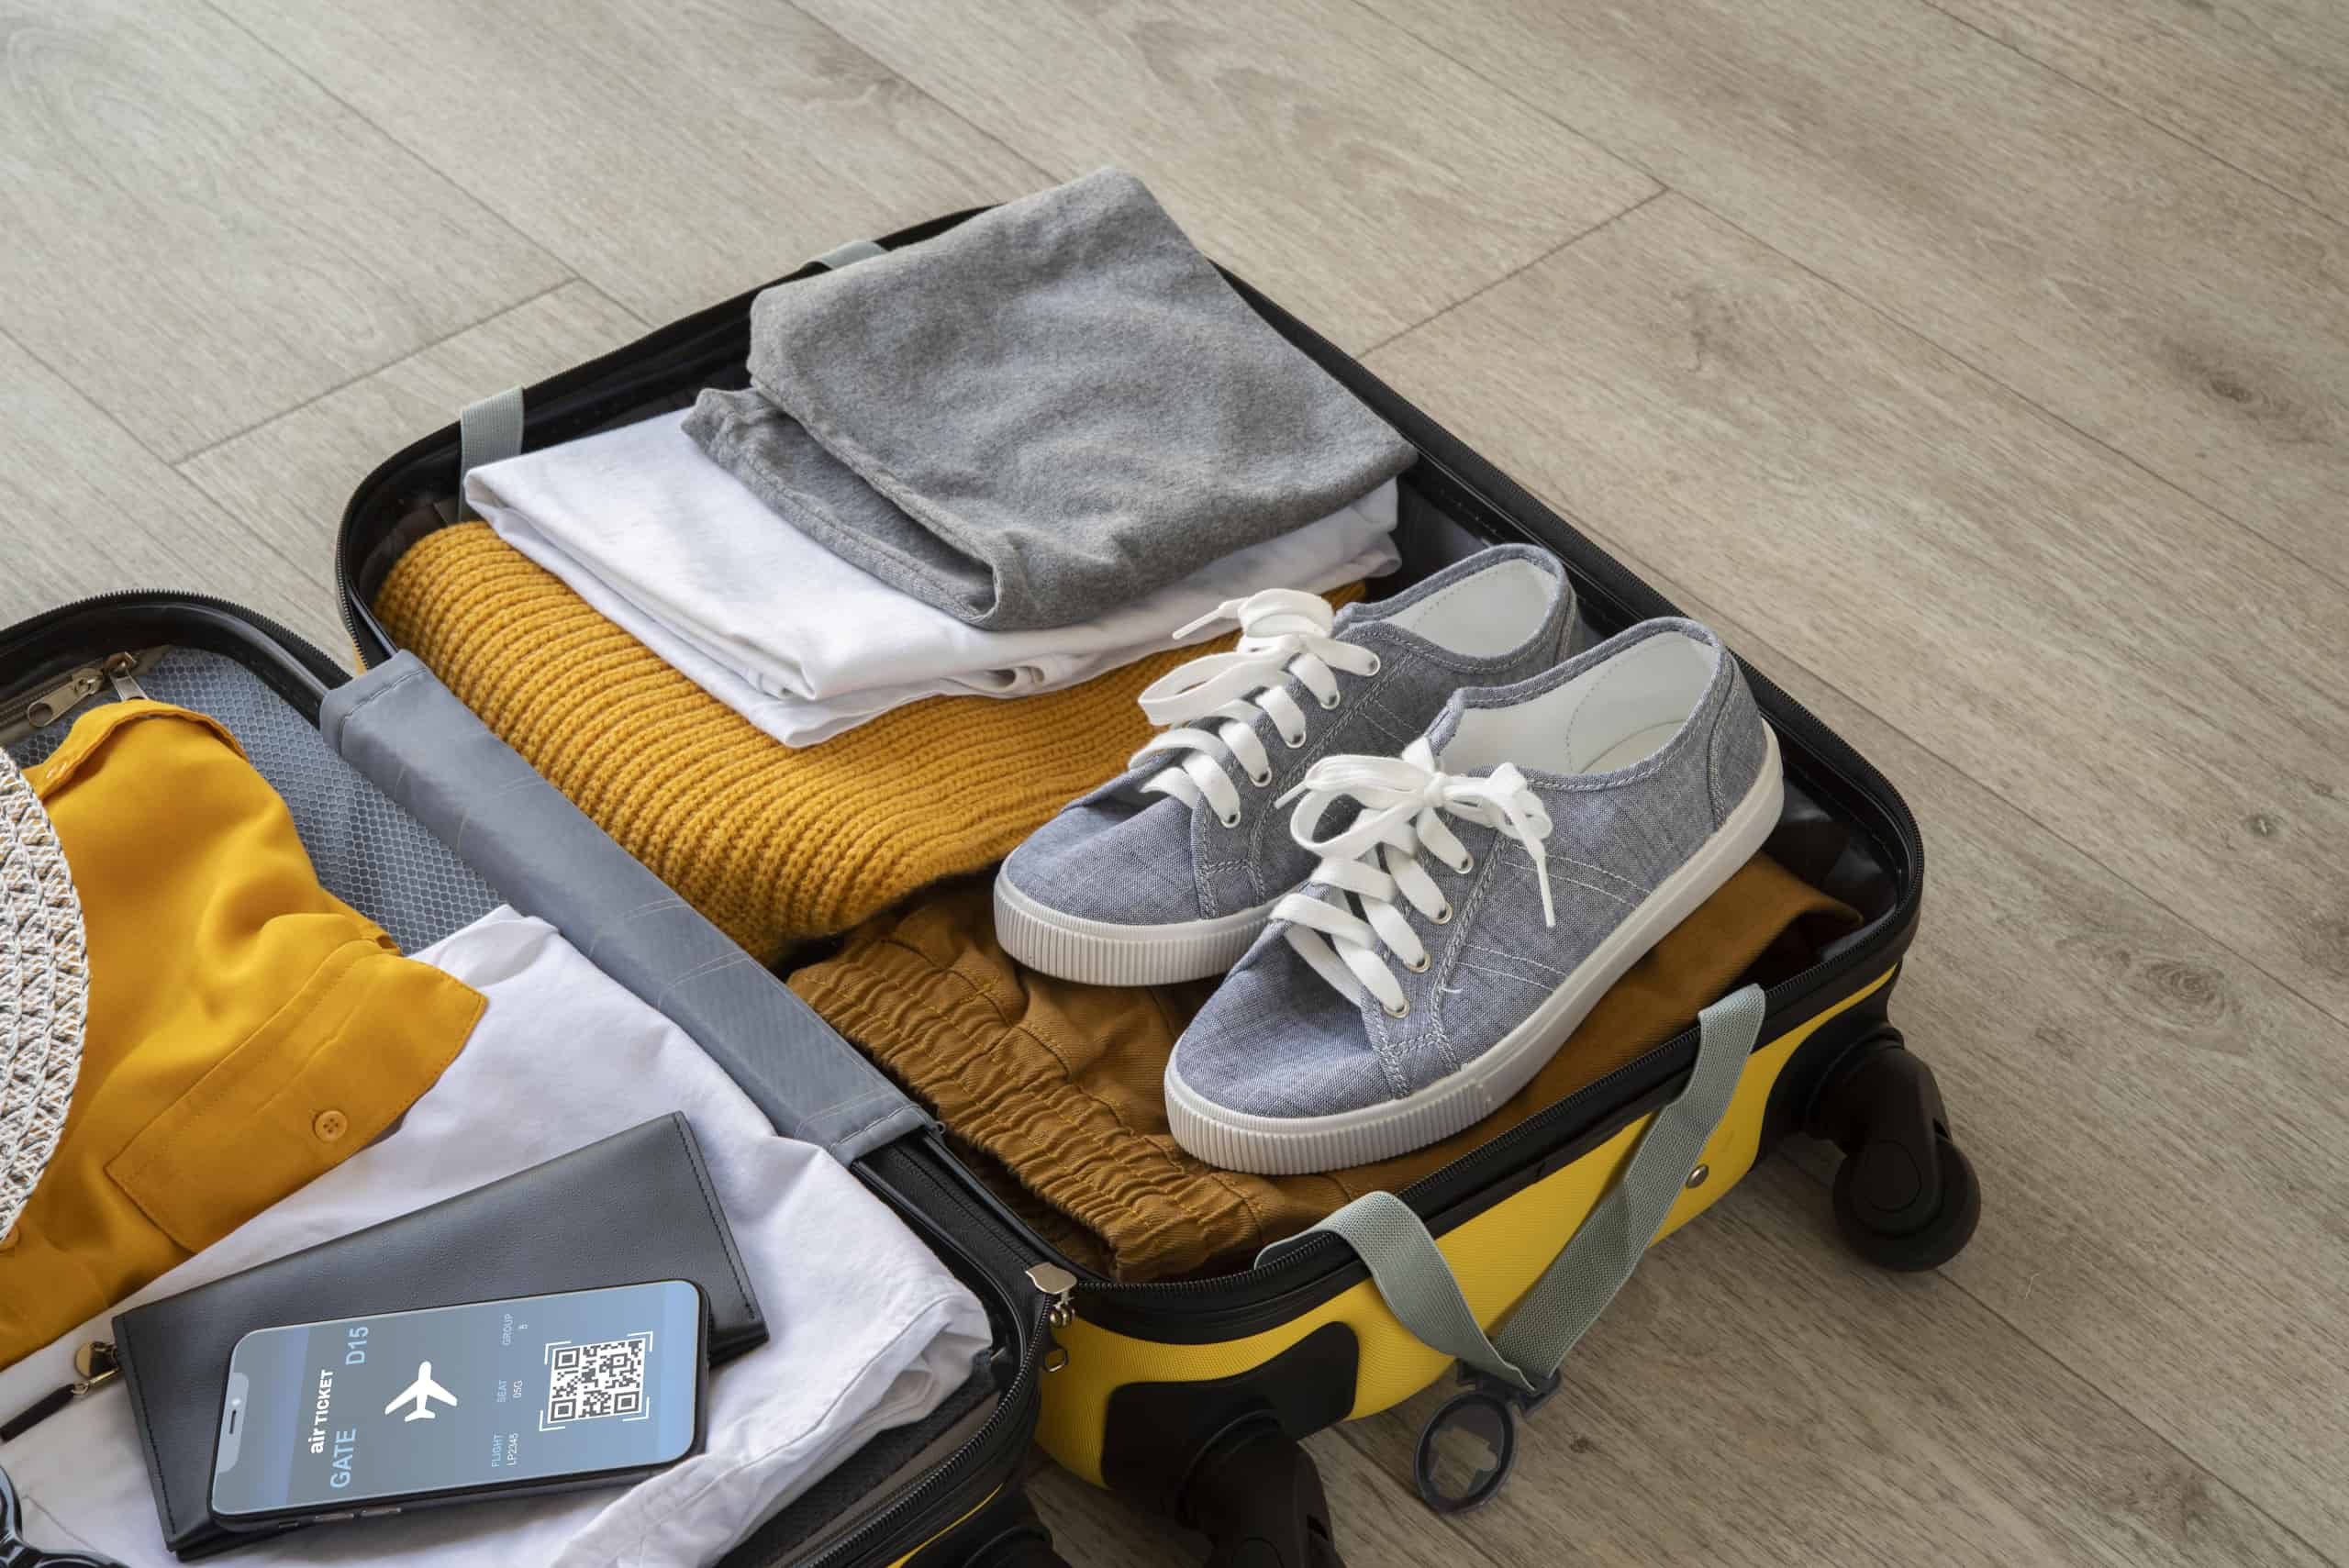 Packing Essentials: What to Bring on Every Trip